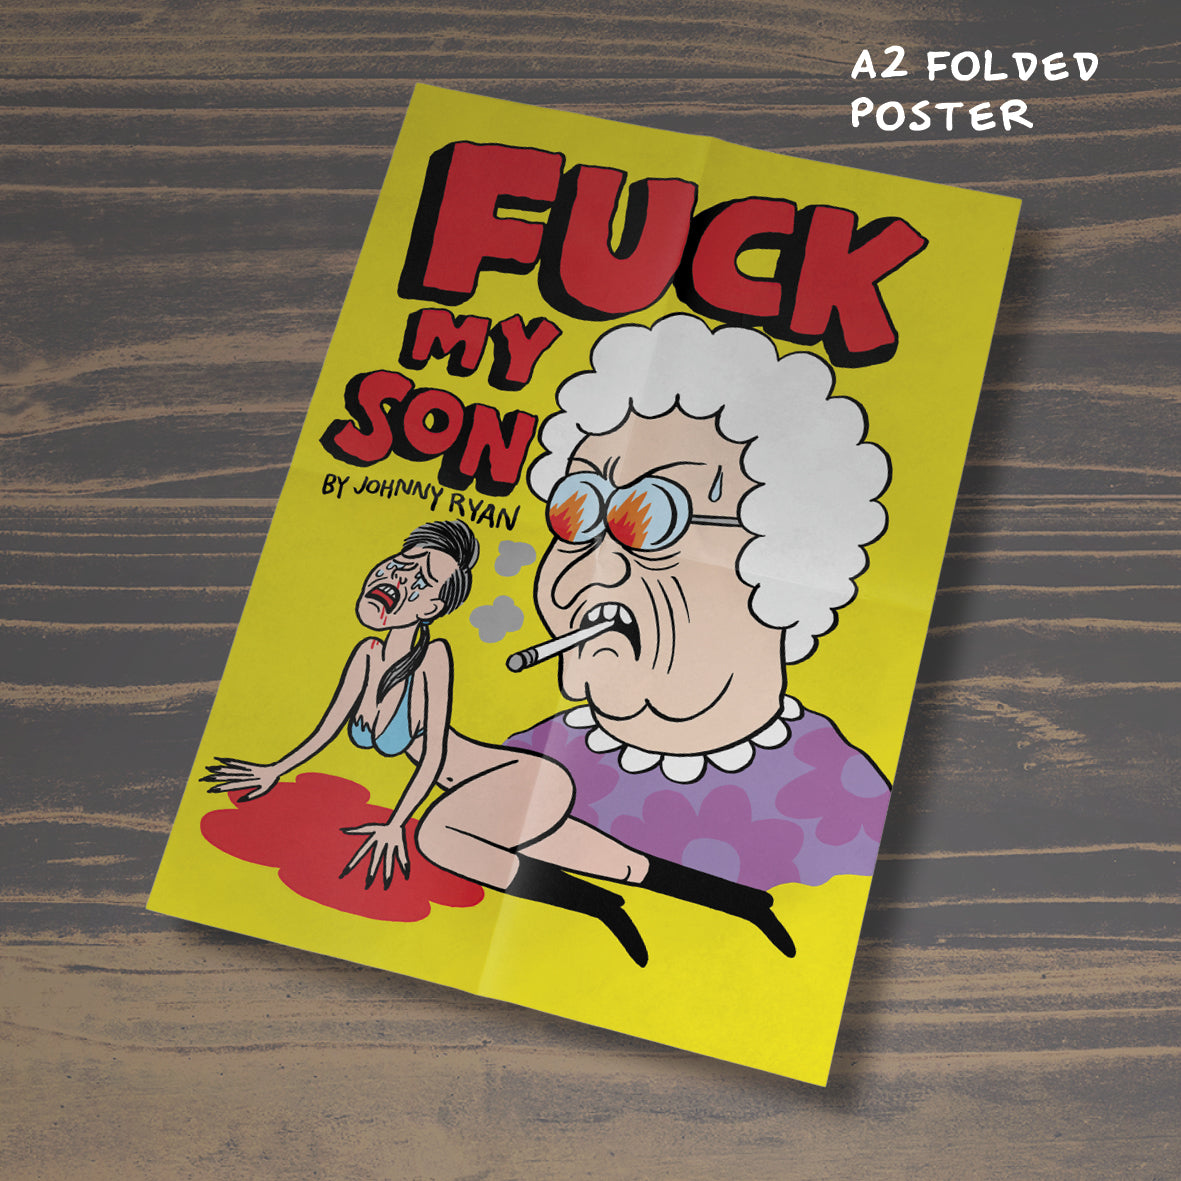 A tale of terror issue one : FUCK MY SON - 150 copies limited edition